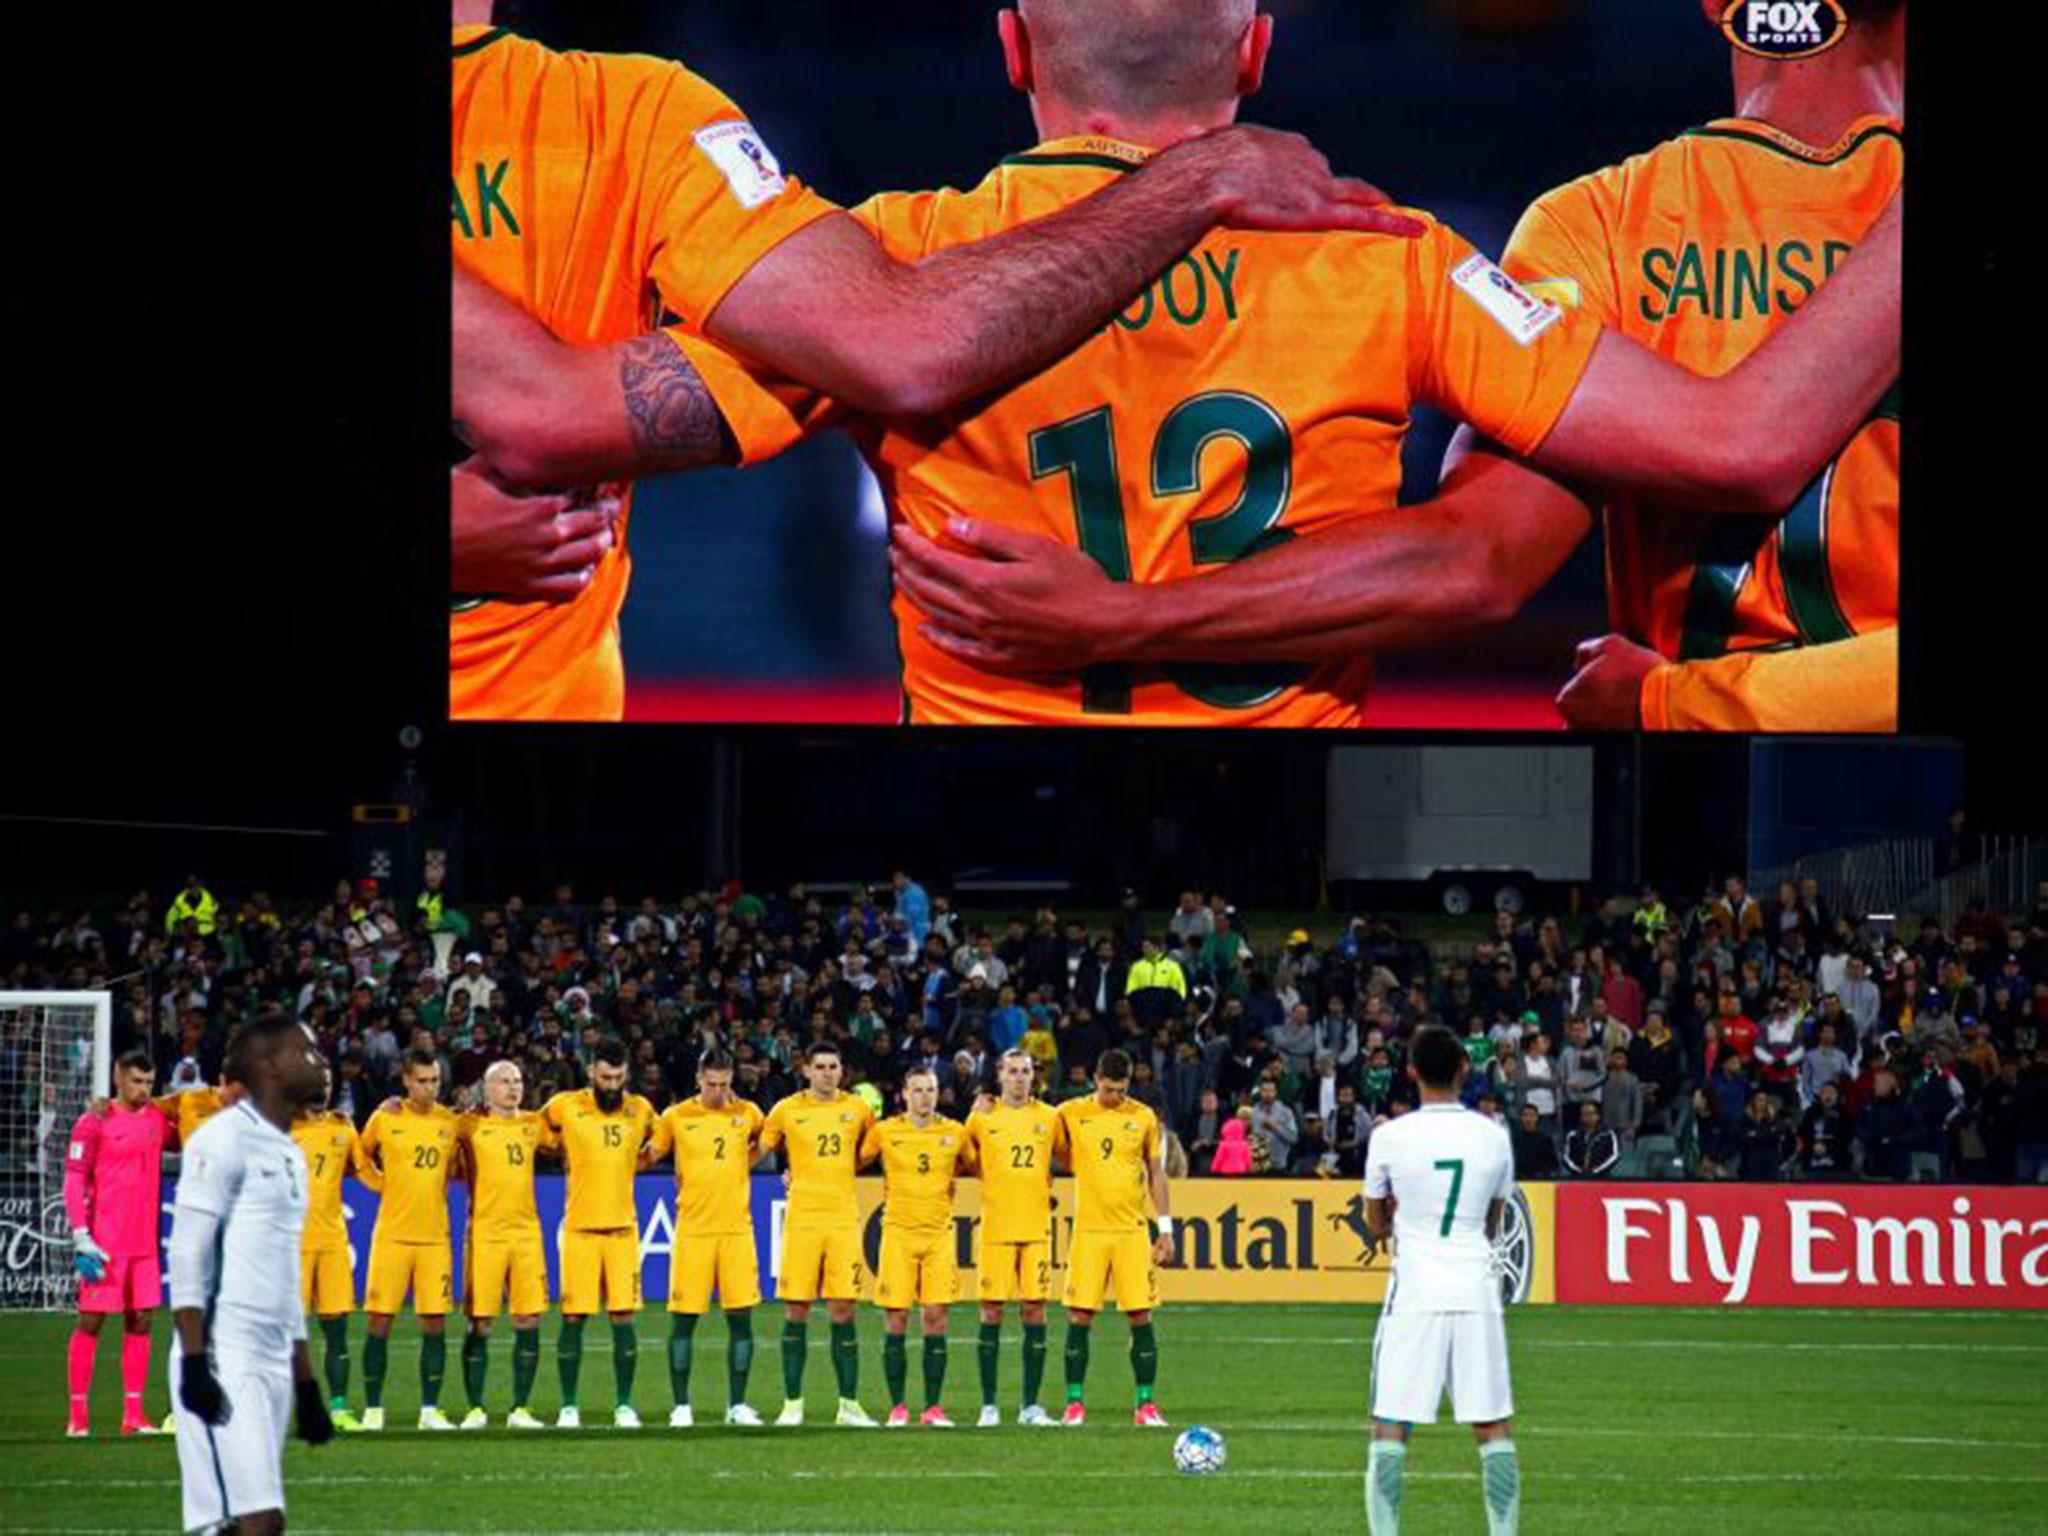 Television pictures show the Saudi players snubbing the minute's silence